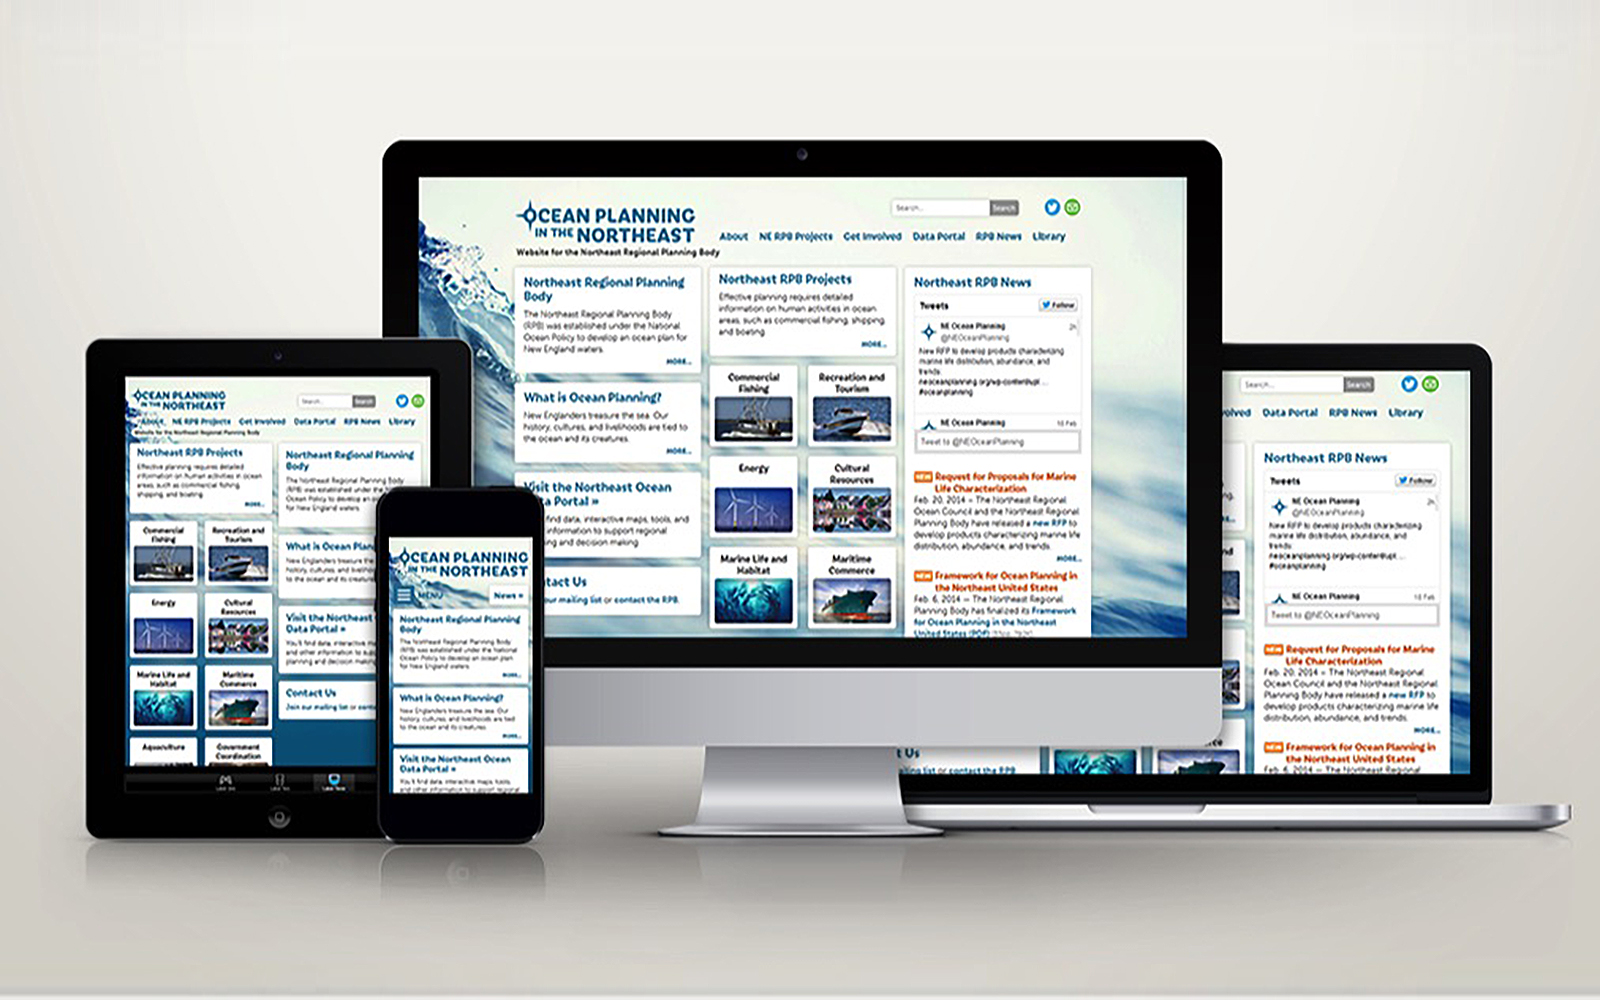 Homepage of the Northeast Regional Ocean Council's "Ocean Planning in the Northeast" website, as shown on a tablet, mobile phone, desktop, and laptop computer